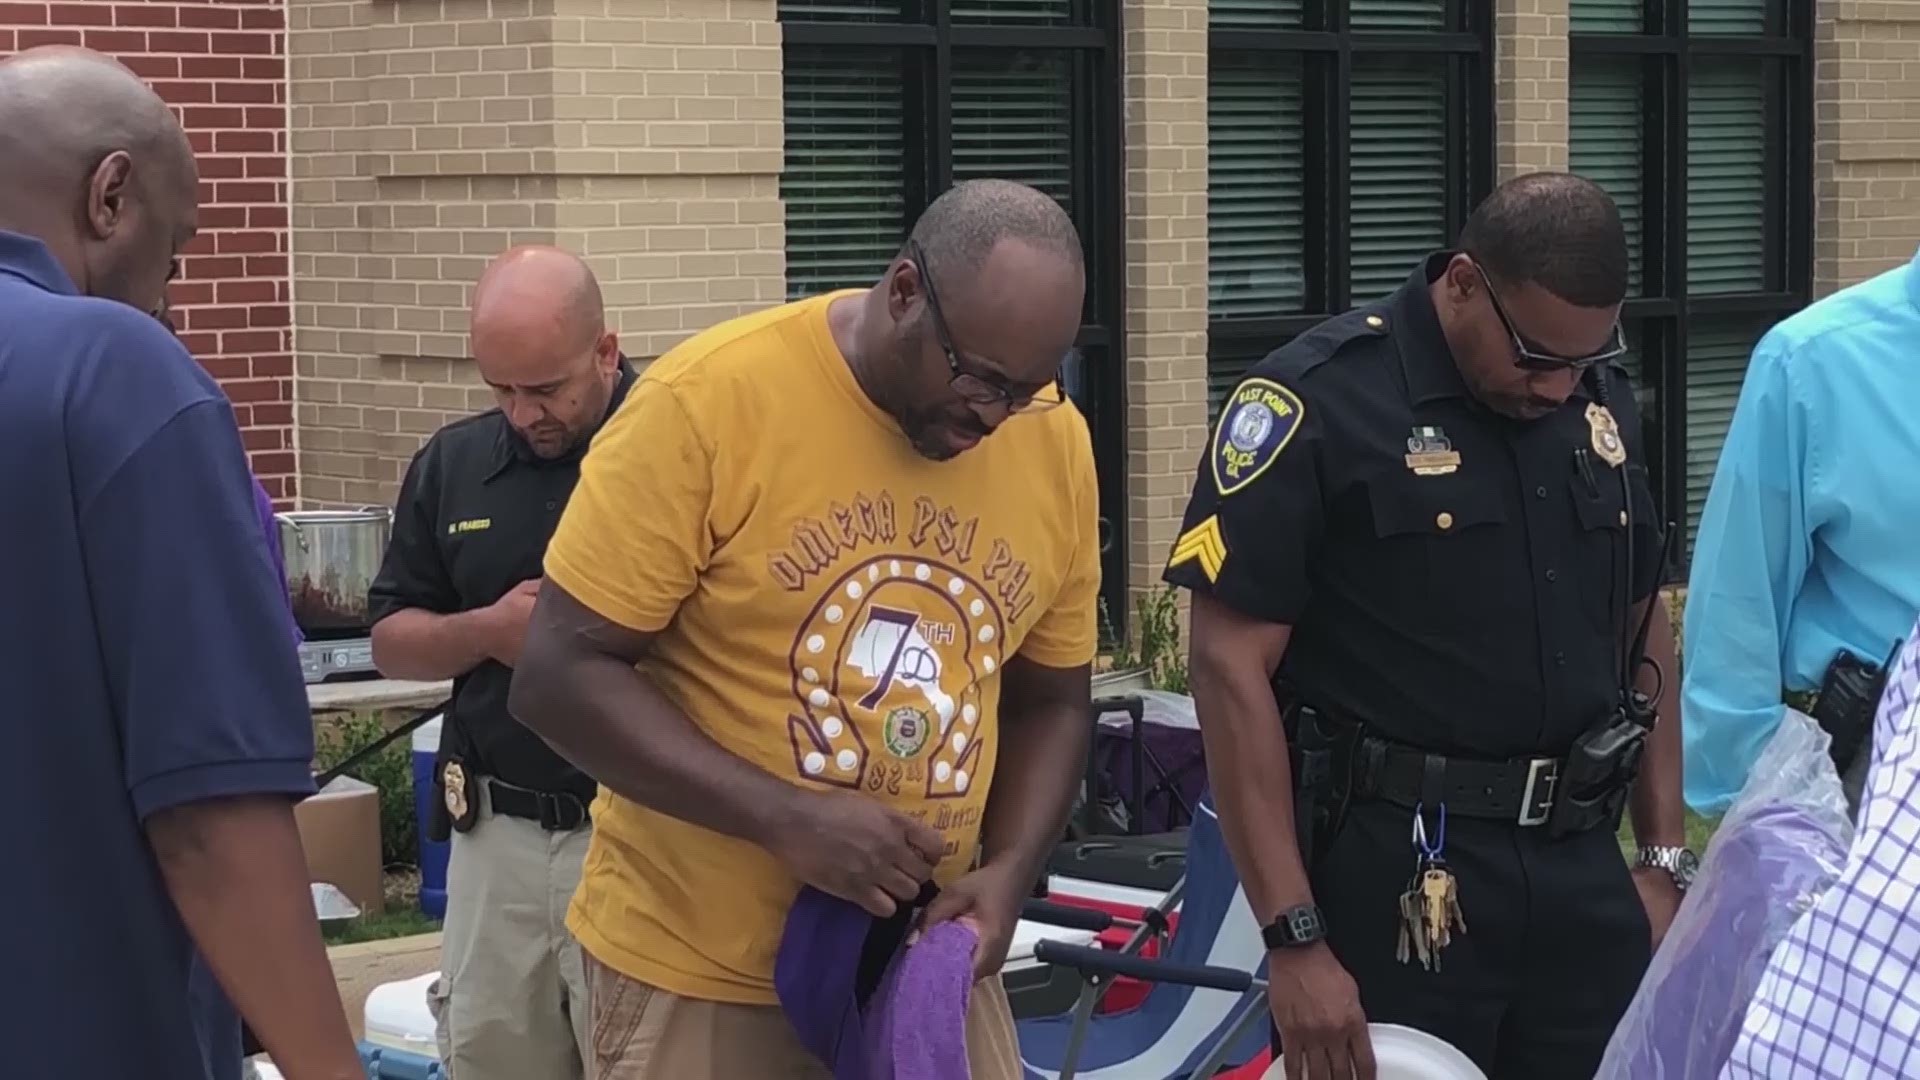 Members of the Omega Psi Phi fraternity show their gratitude